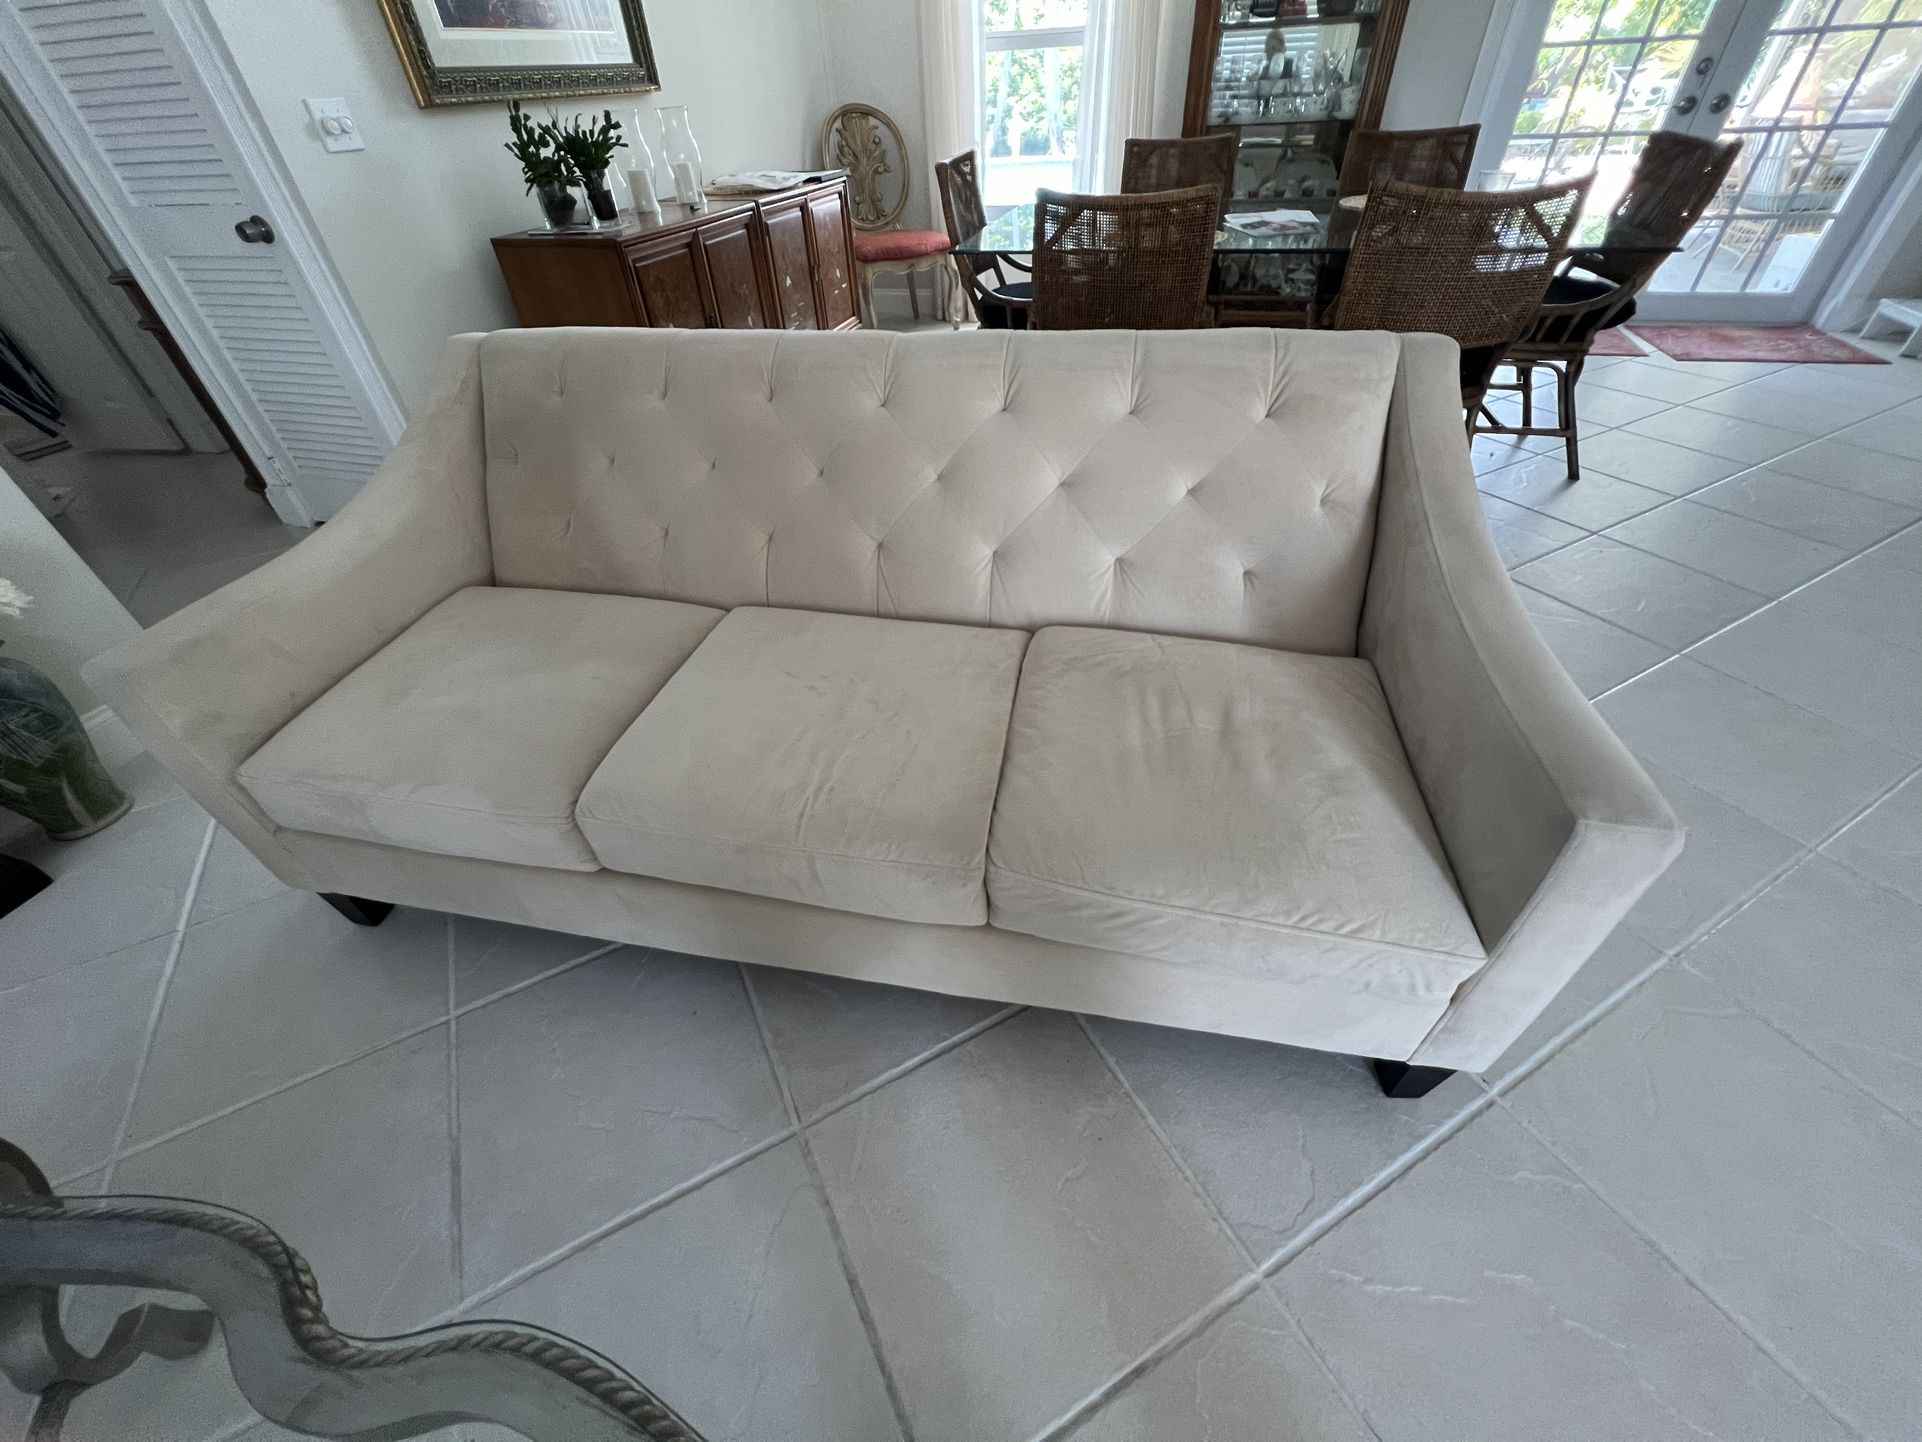 Beige Couch   $75.